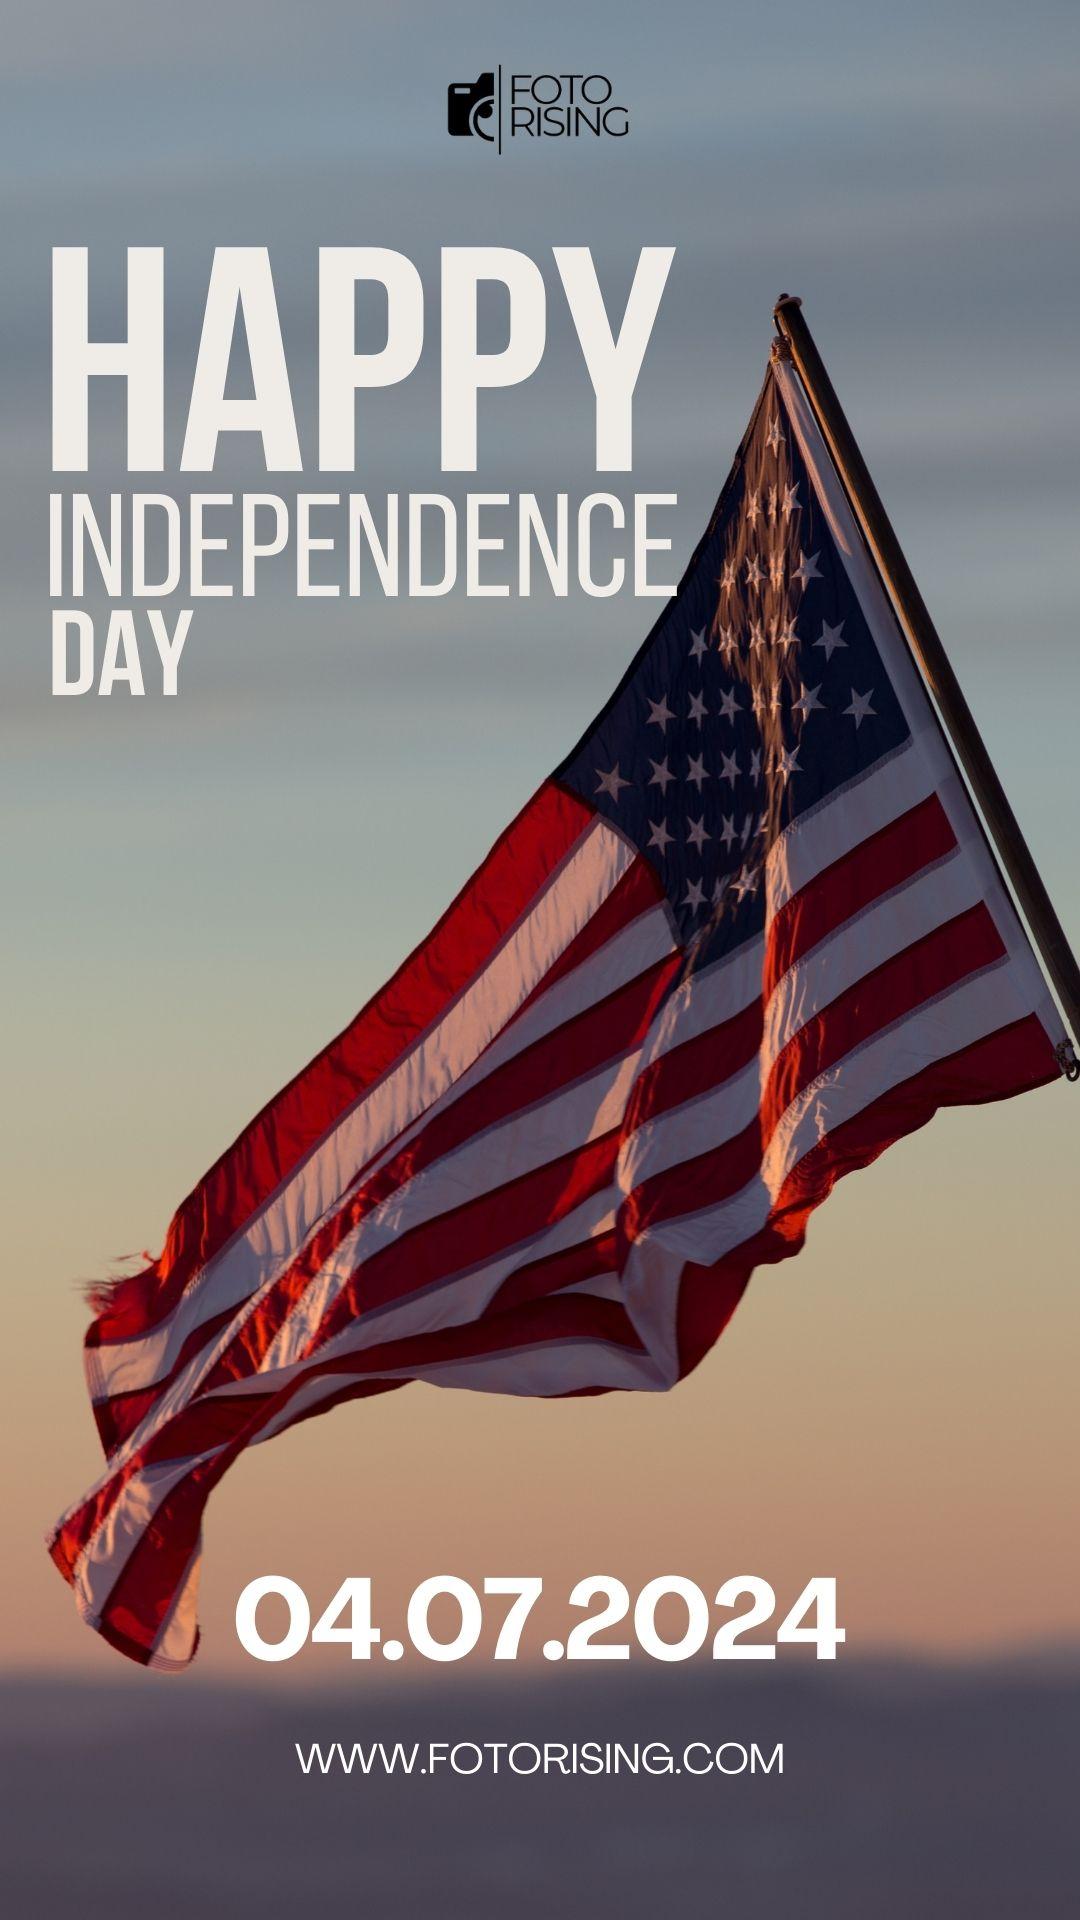 The World Celebrates Independence Day – July 4th